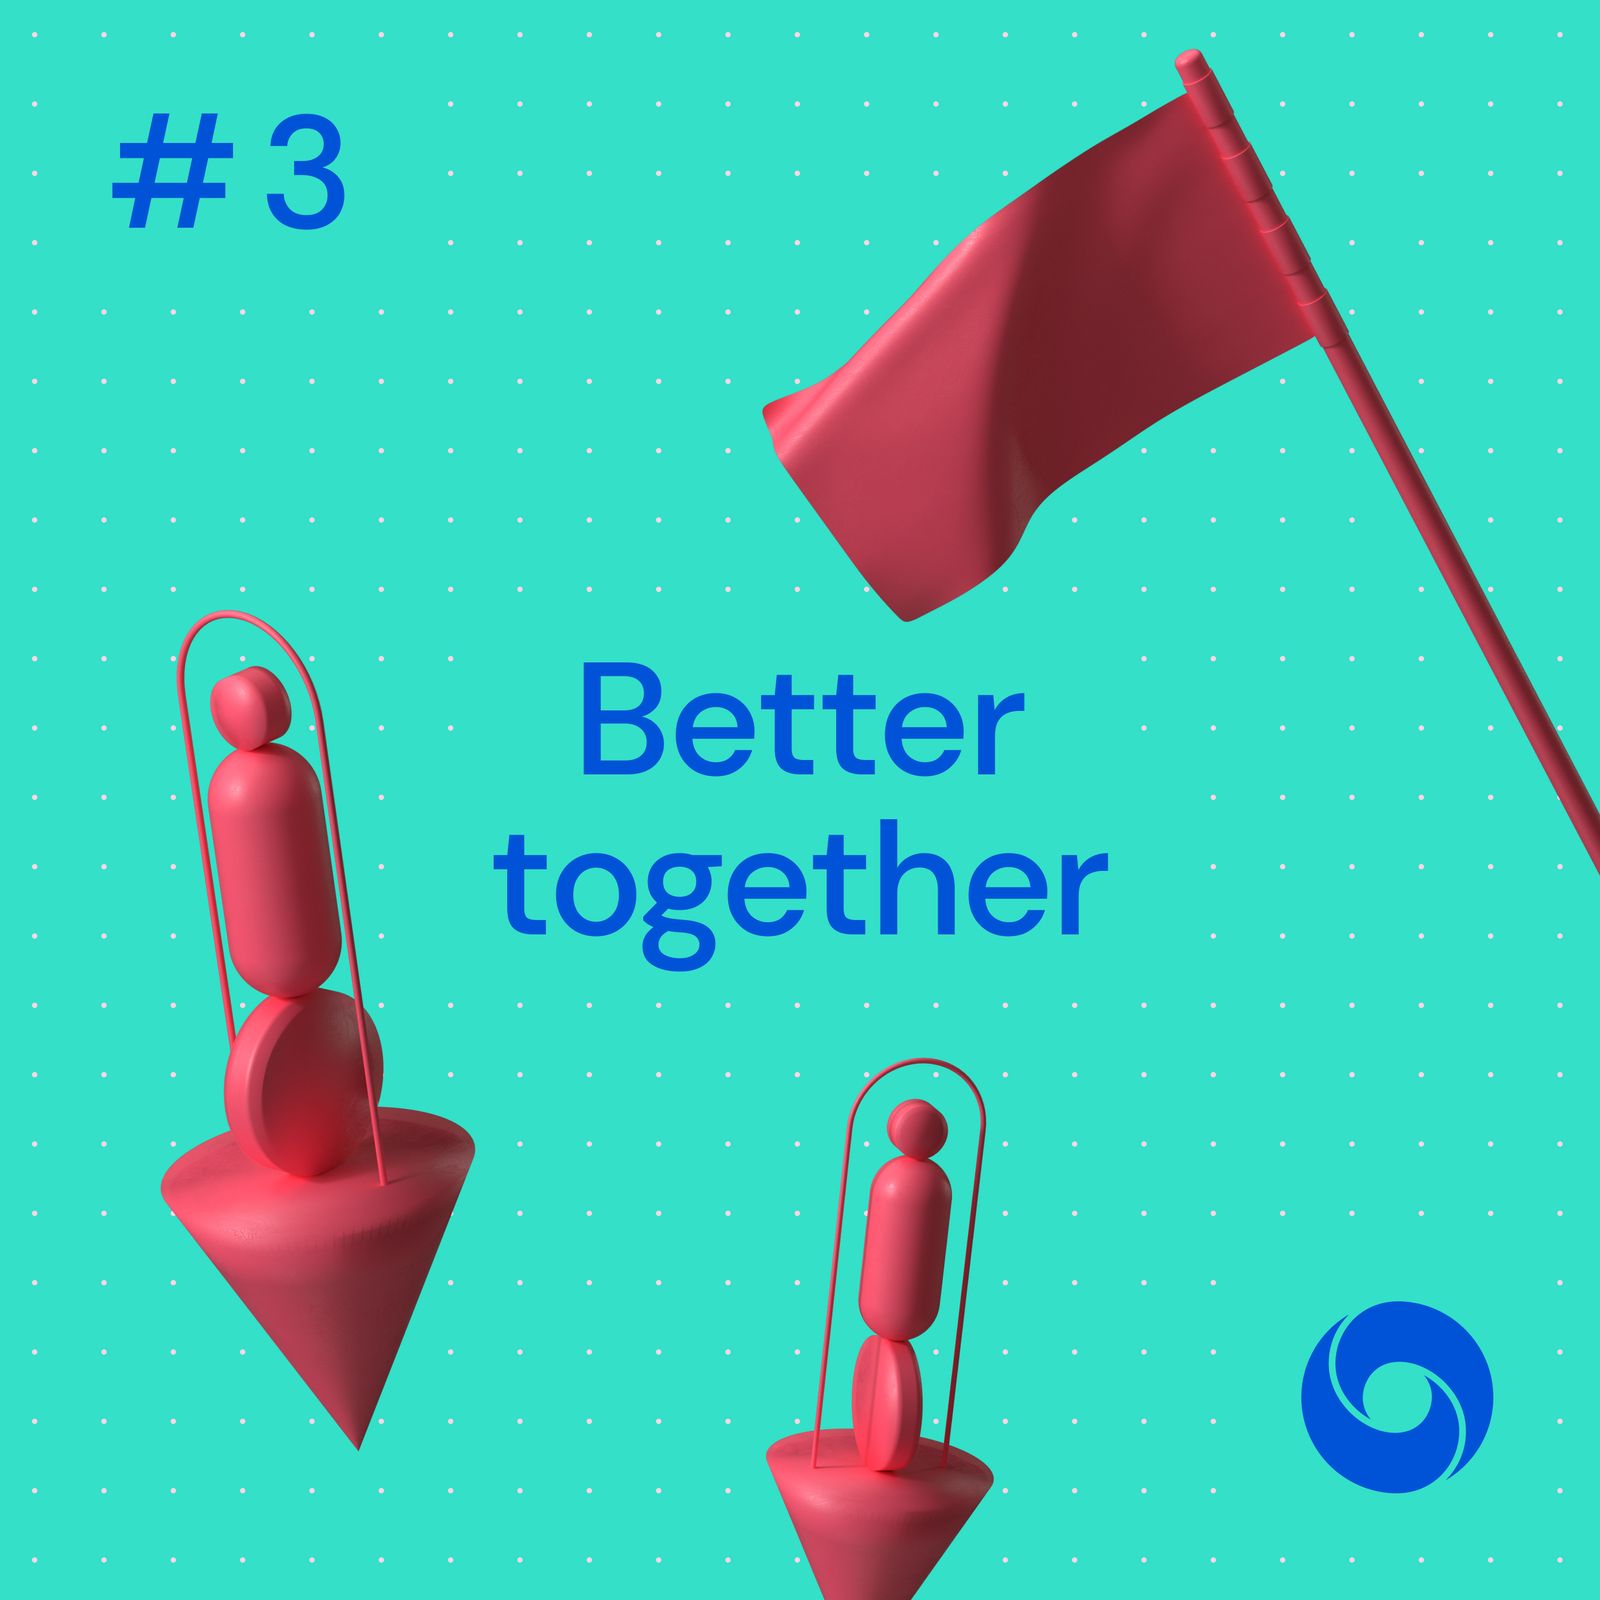 S2 Ep3: Better together